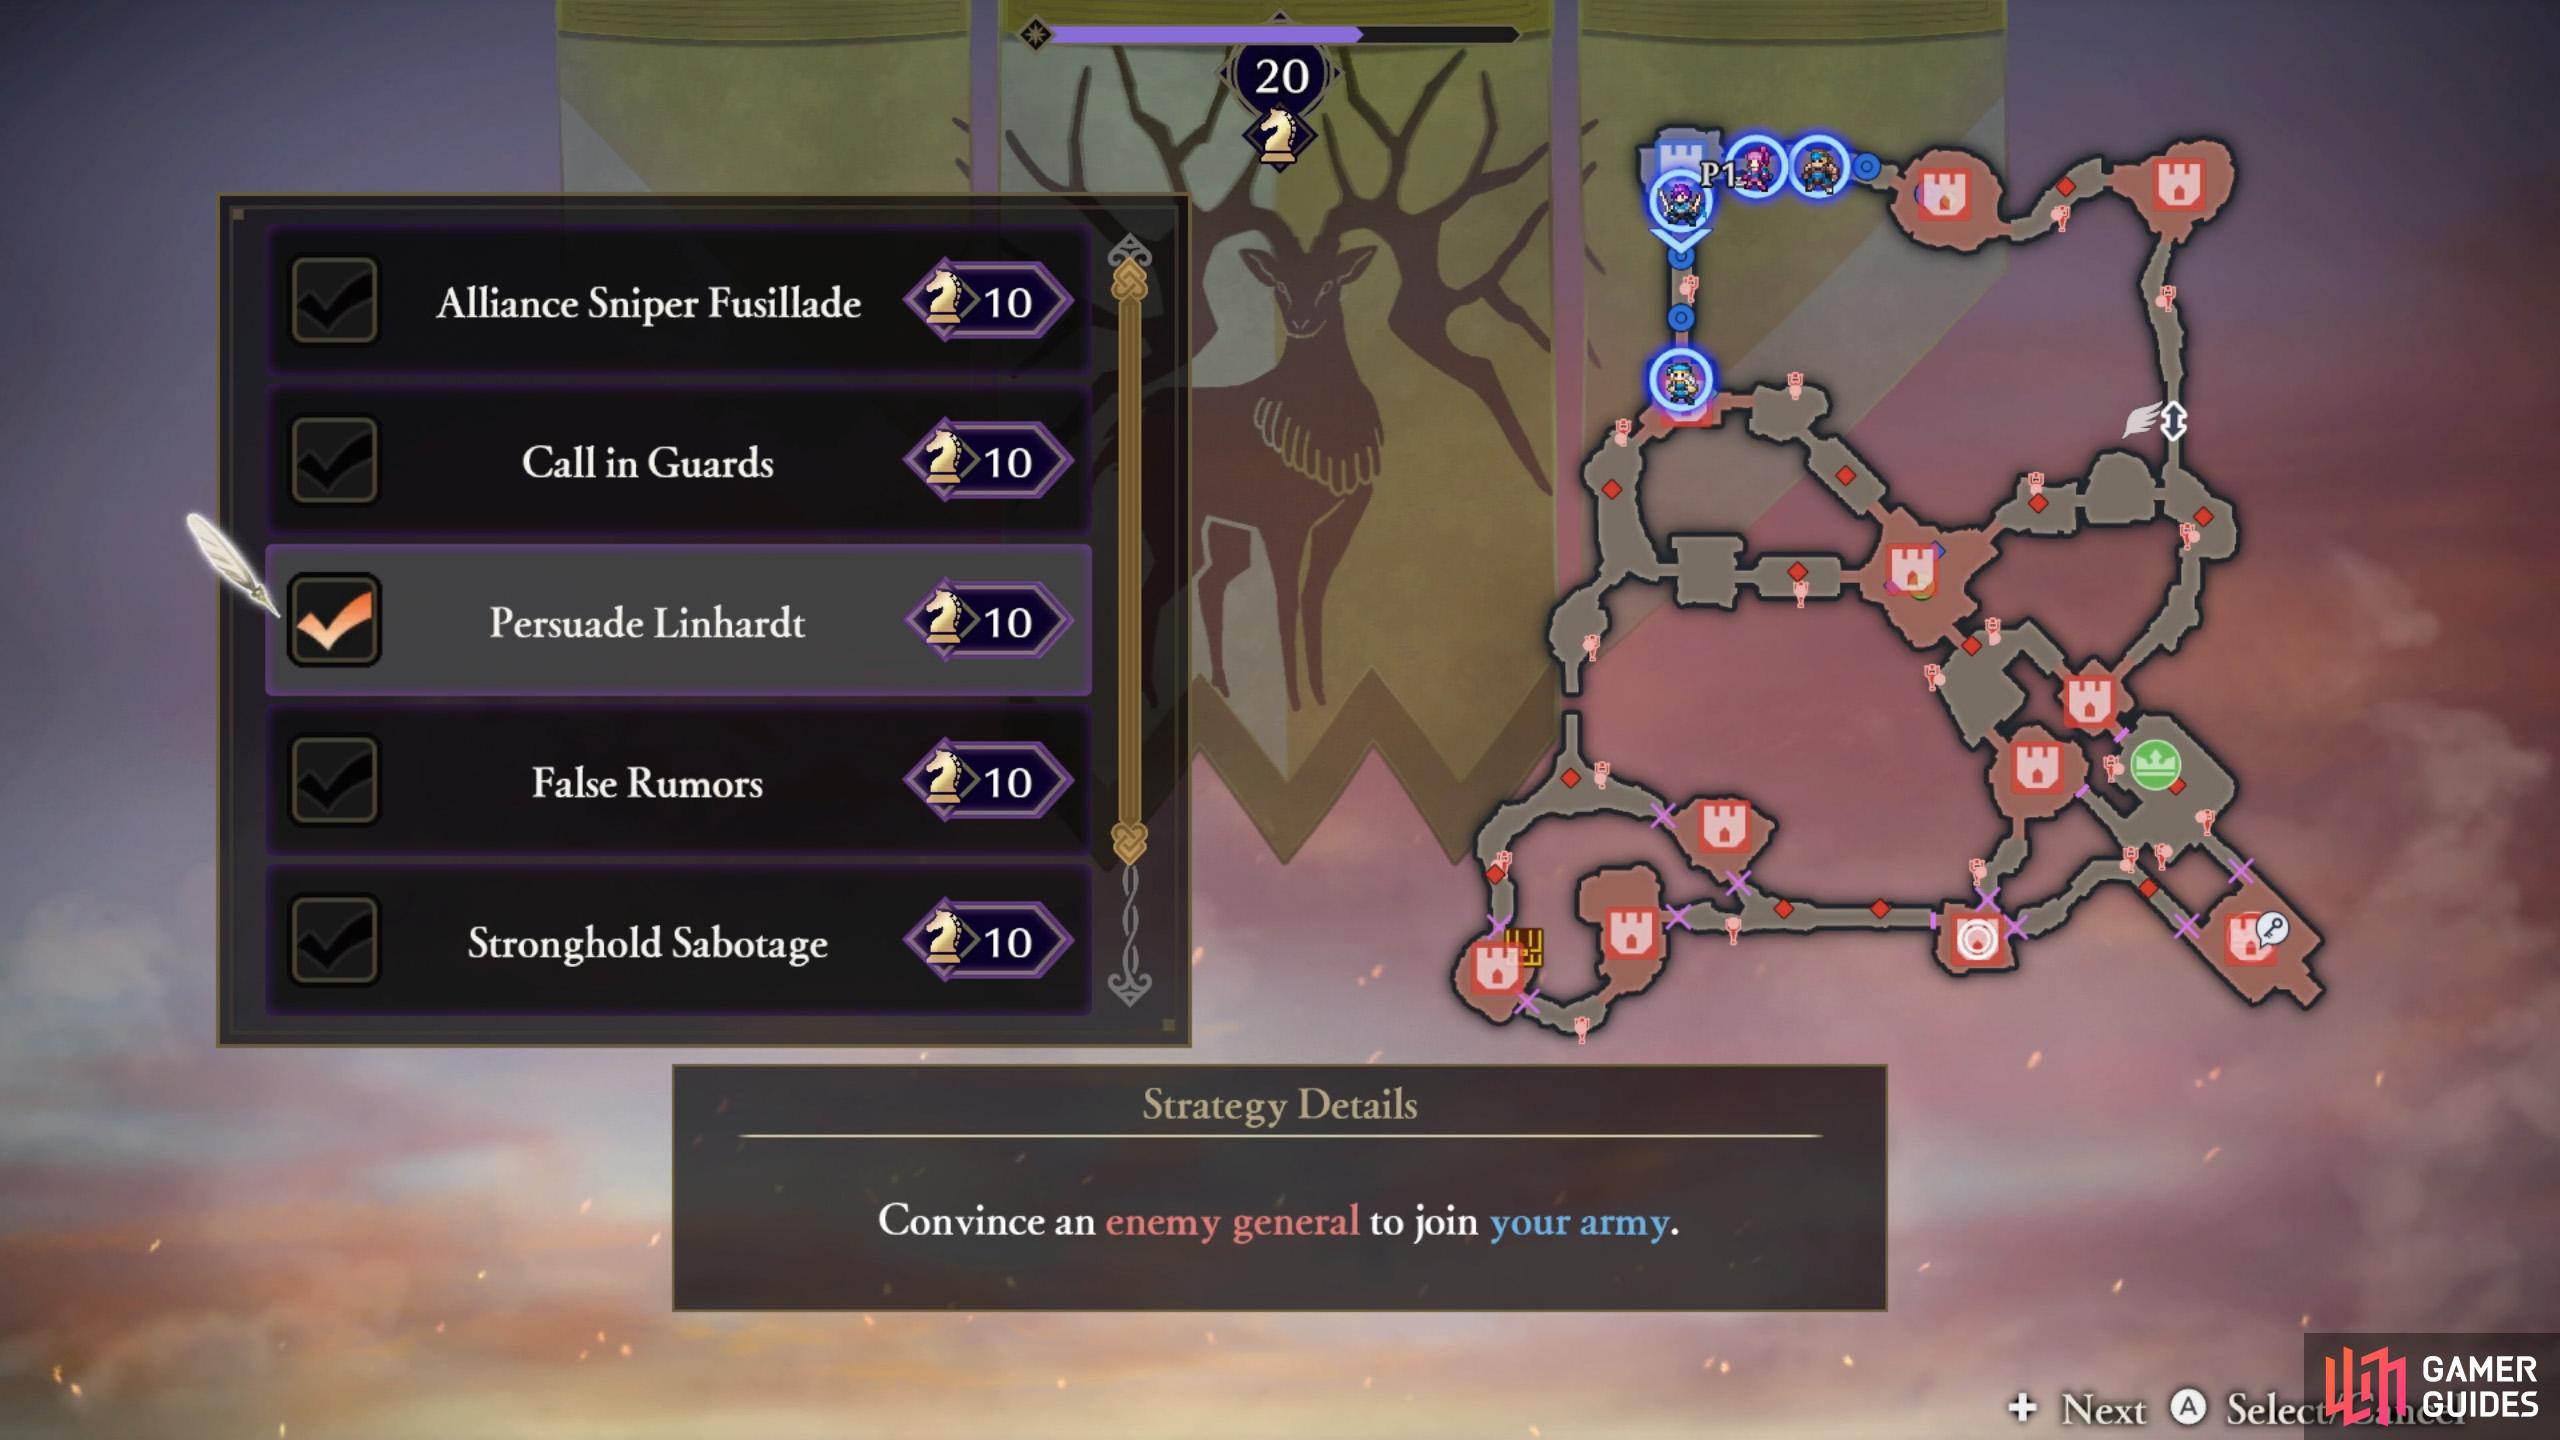 Before starting the main quest fight, enable the Strategy to recruit the character.